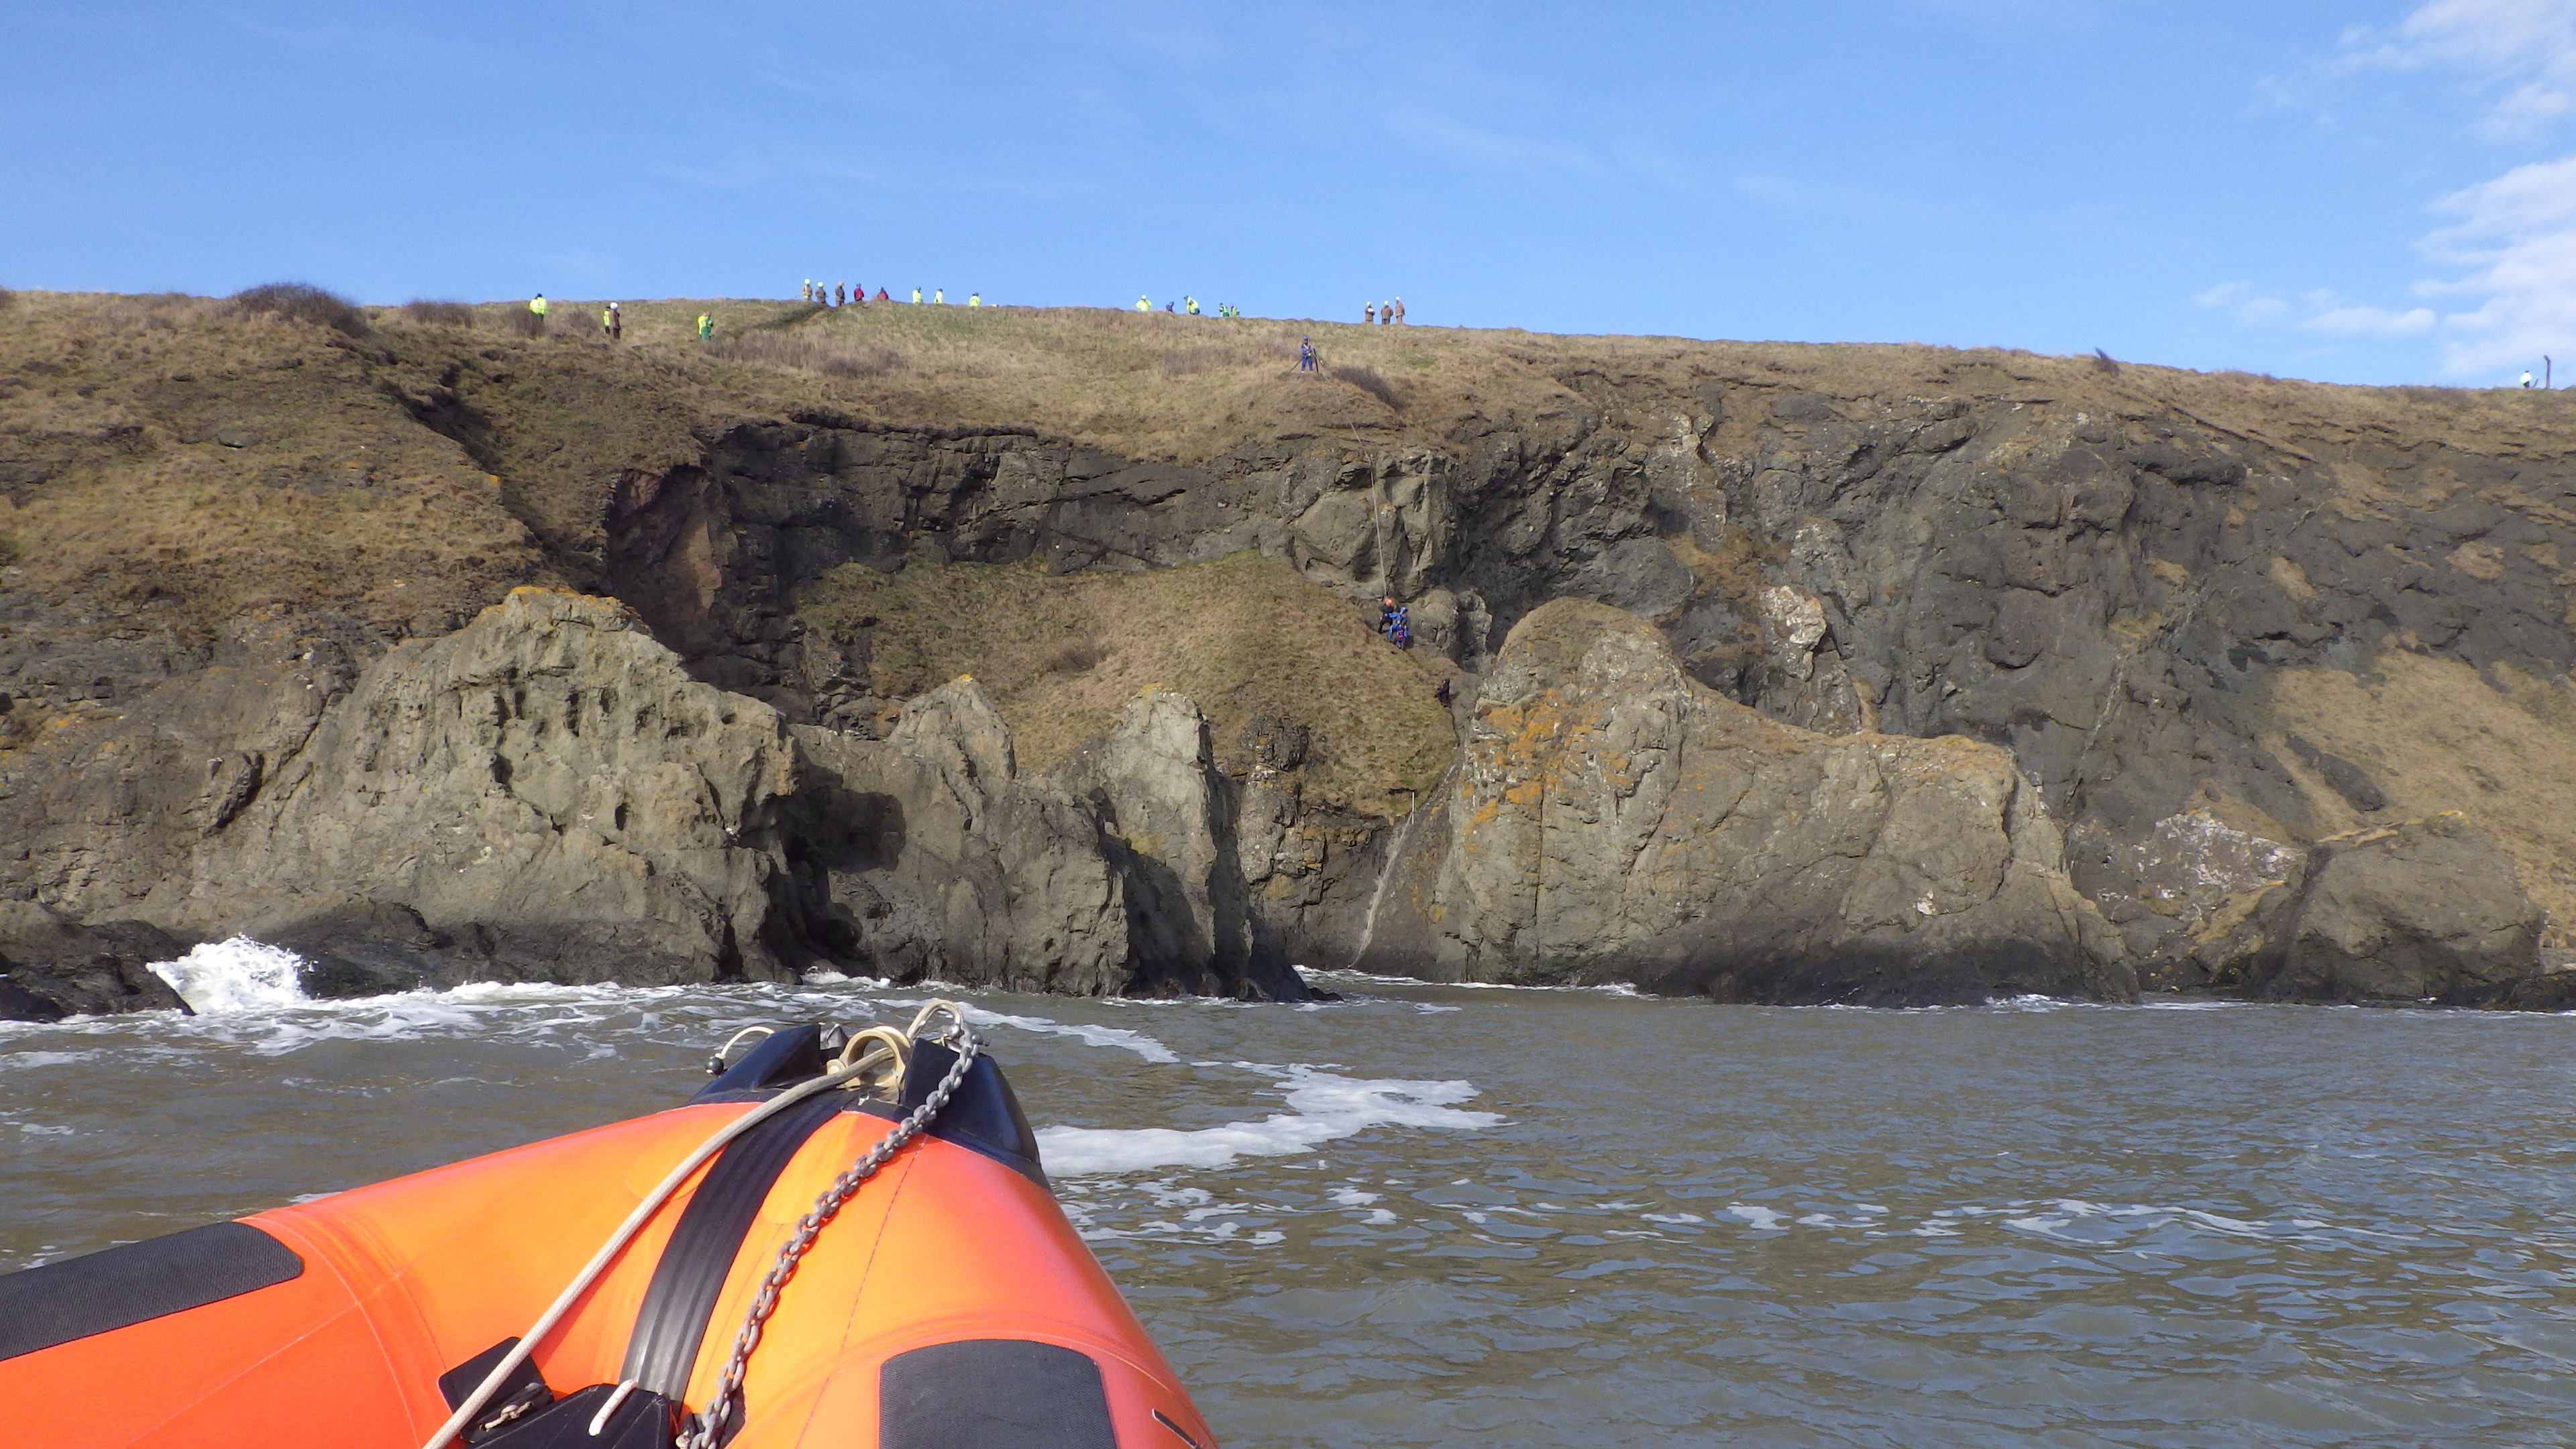 Kinghorn lifeboat was called to assist during the emergency operation.